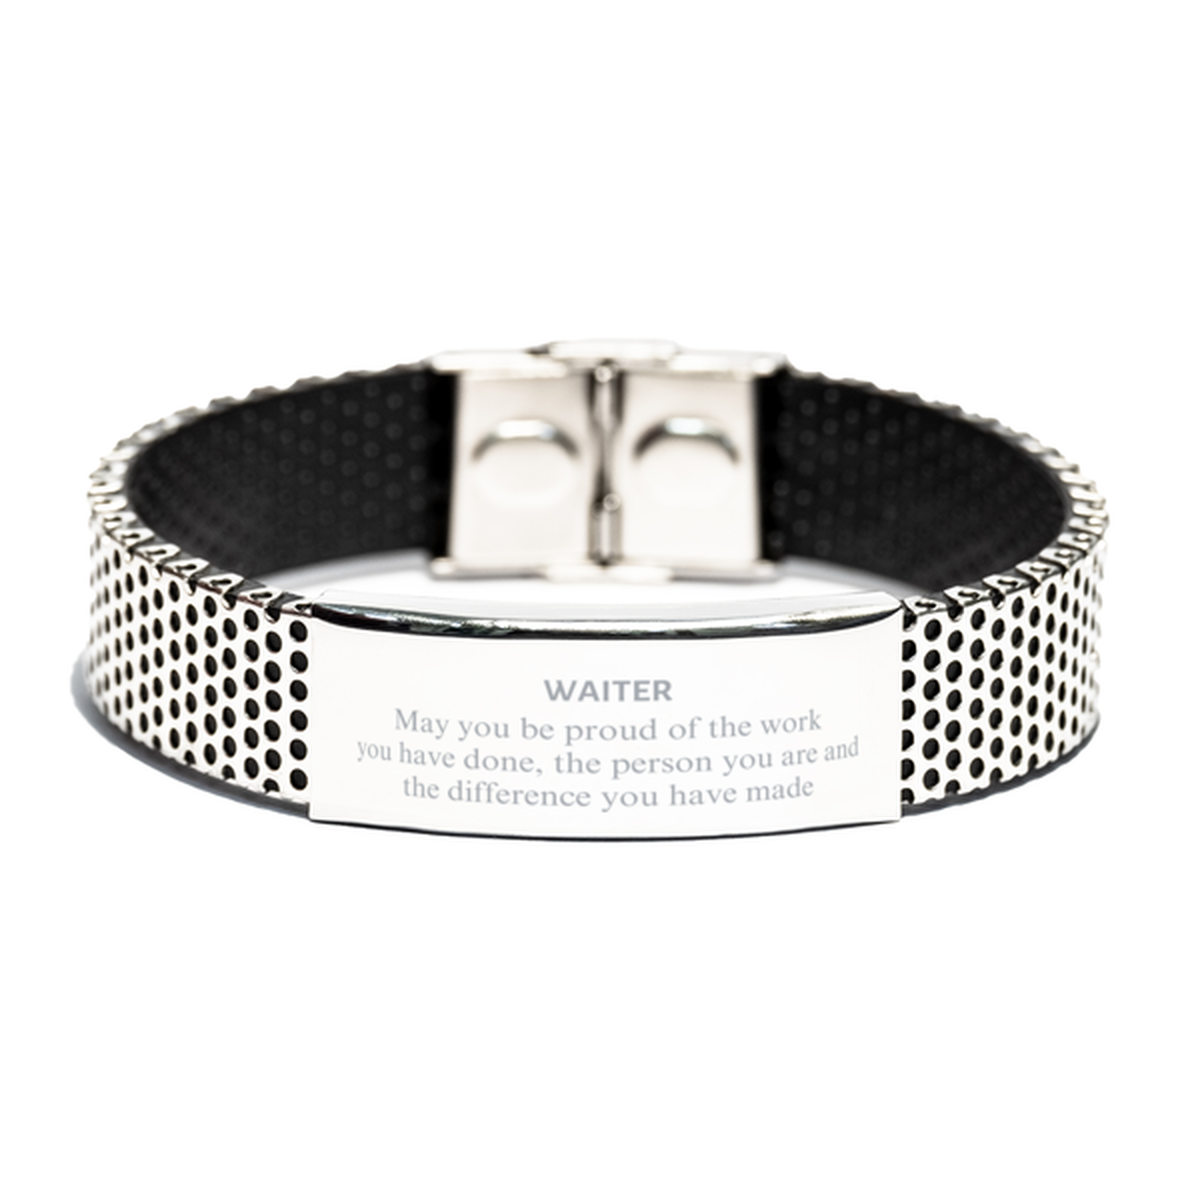 Waiter May you be proud of the work you have done, Retirement Waiter Stainless Steel Bracelet for Colleague Appreciation Gifts Amazing for Waiter